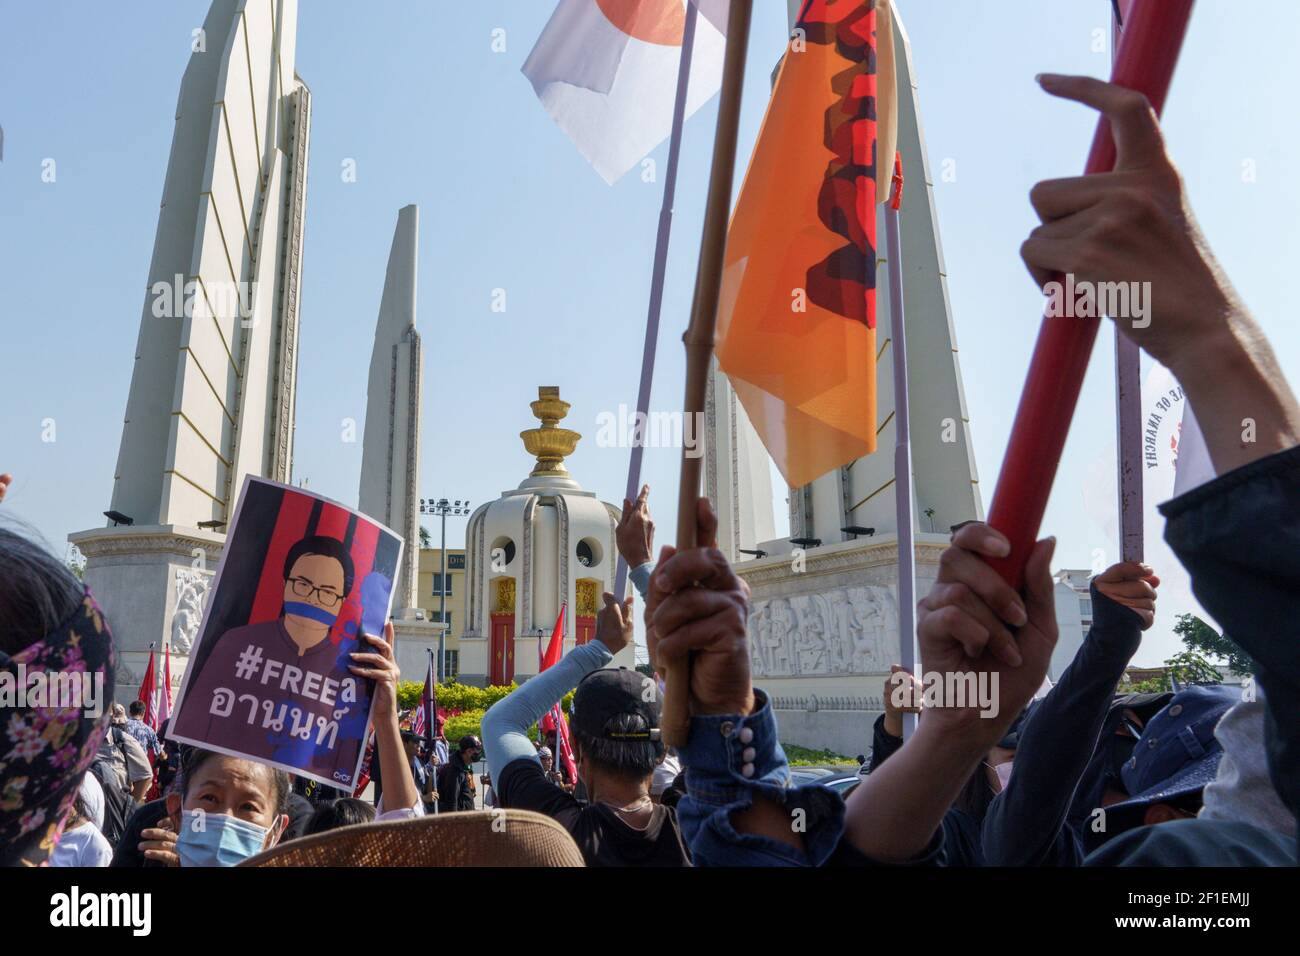 A protestor holding a portrait of Arnon Nampa, during the demonstration. A group of protestors led by Jatupat 'Pai' Boonpattararaksa, one of the Thai pro-democracy leaders arrives at the Democracy monument while protesting against the imprisonment of 4 pro-democracy activists (Somyot Pruksakasemsuk, Patiwat Saraiyam, Parit 'Penguin' Chivarak, and Anon Nampa) who were arrested under the lese majeste law (Article 112 of the Thai criminal code) and demand the reform of the monarchy and abolition of the lese-majesty law. Stock Photo